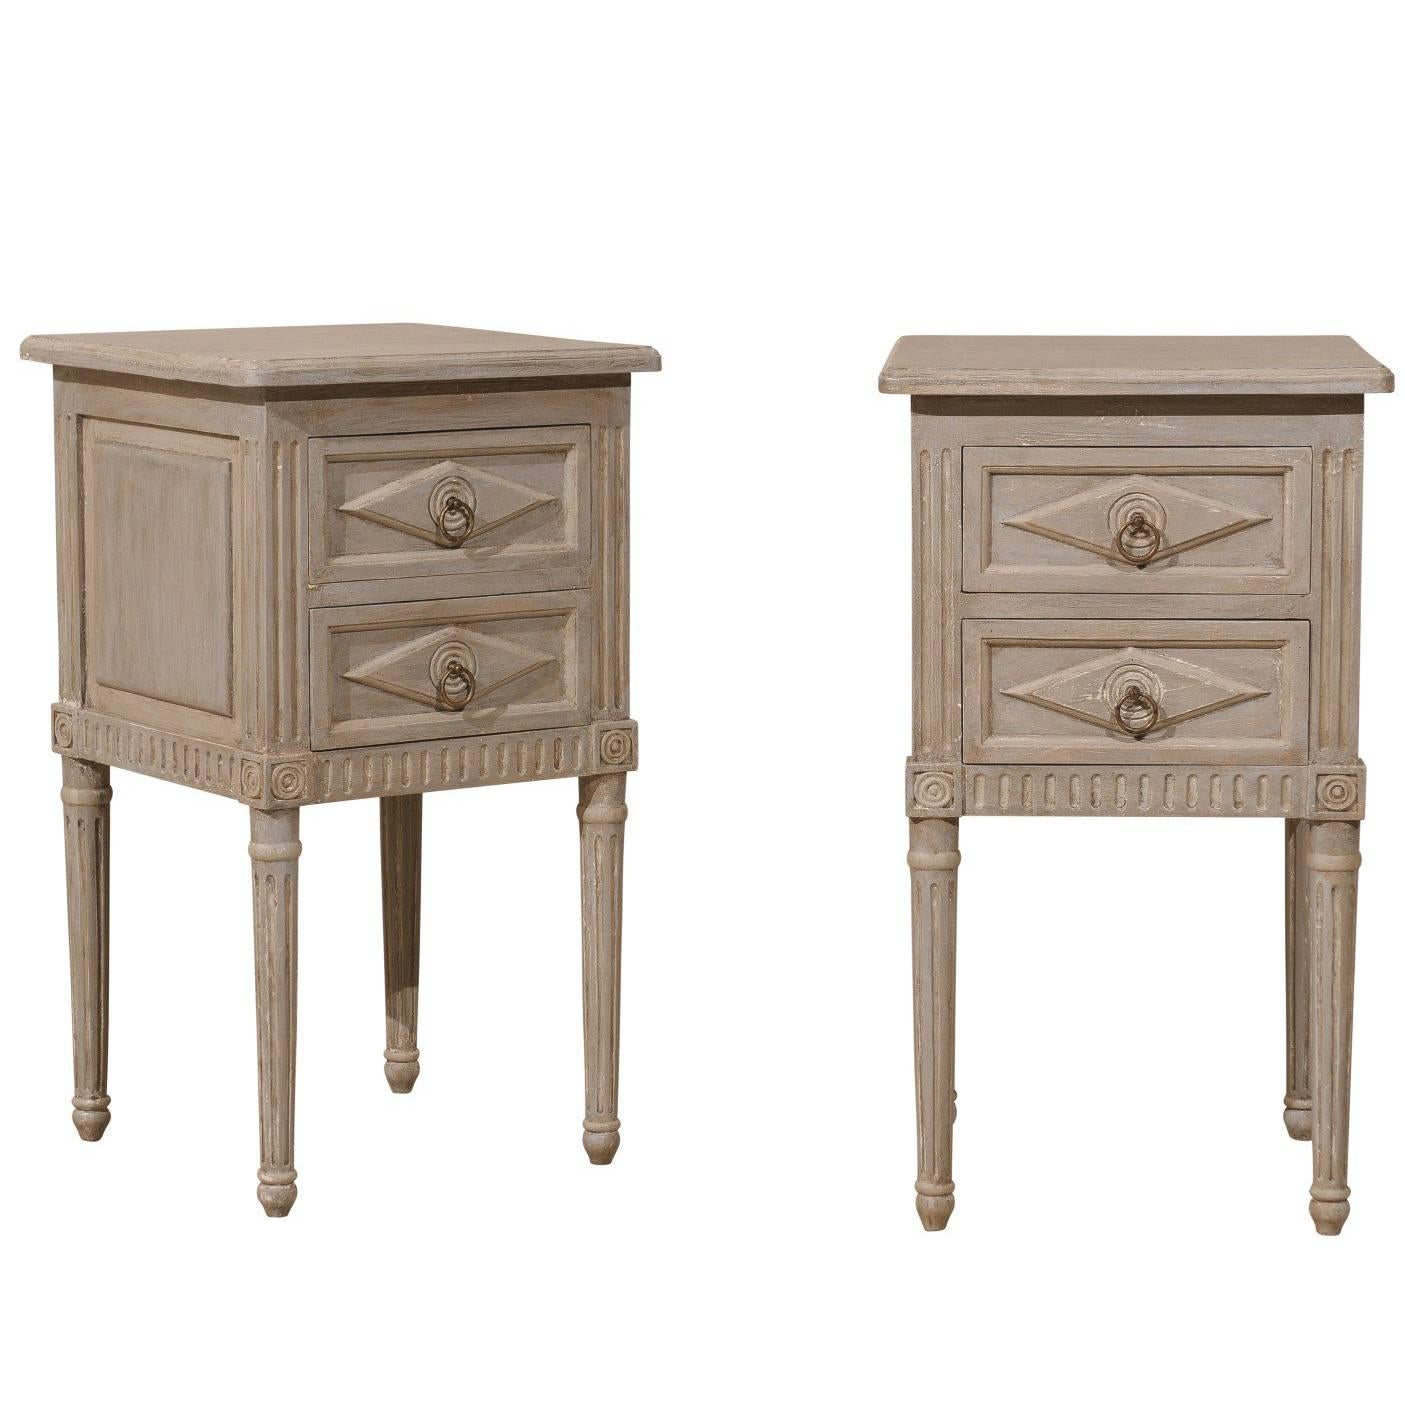 Pair of Small Sized Two-Drawer Painted Wood Nightstand Tables in Neutral Grey